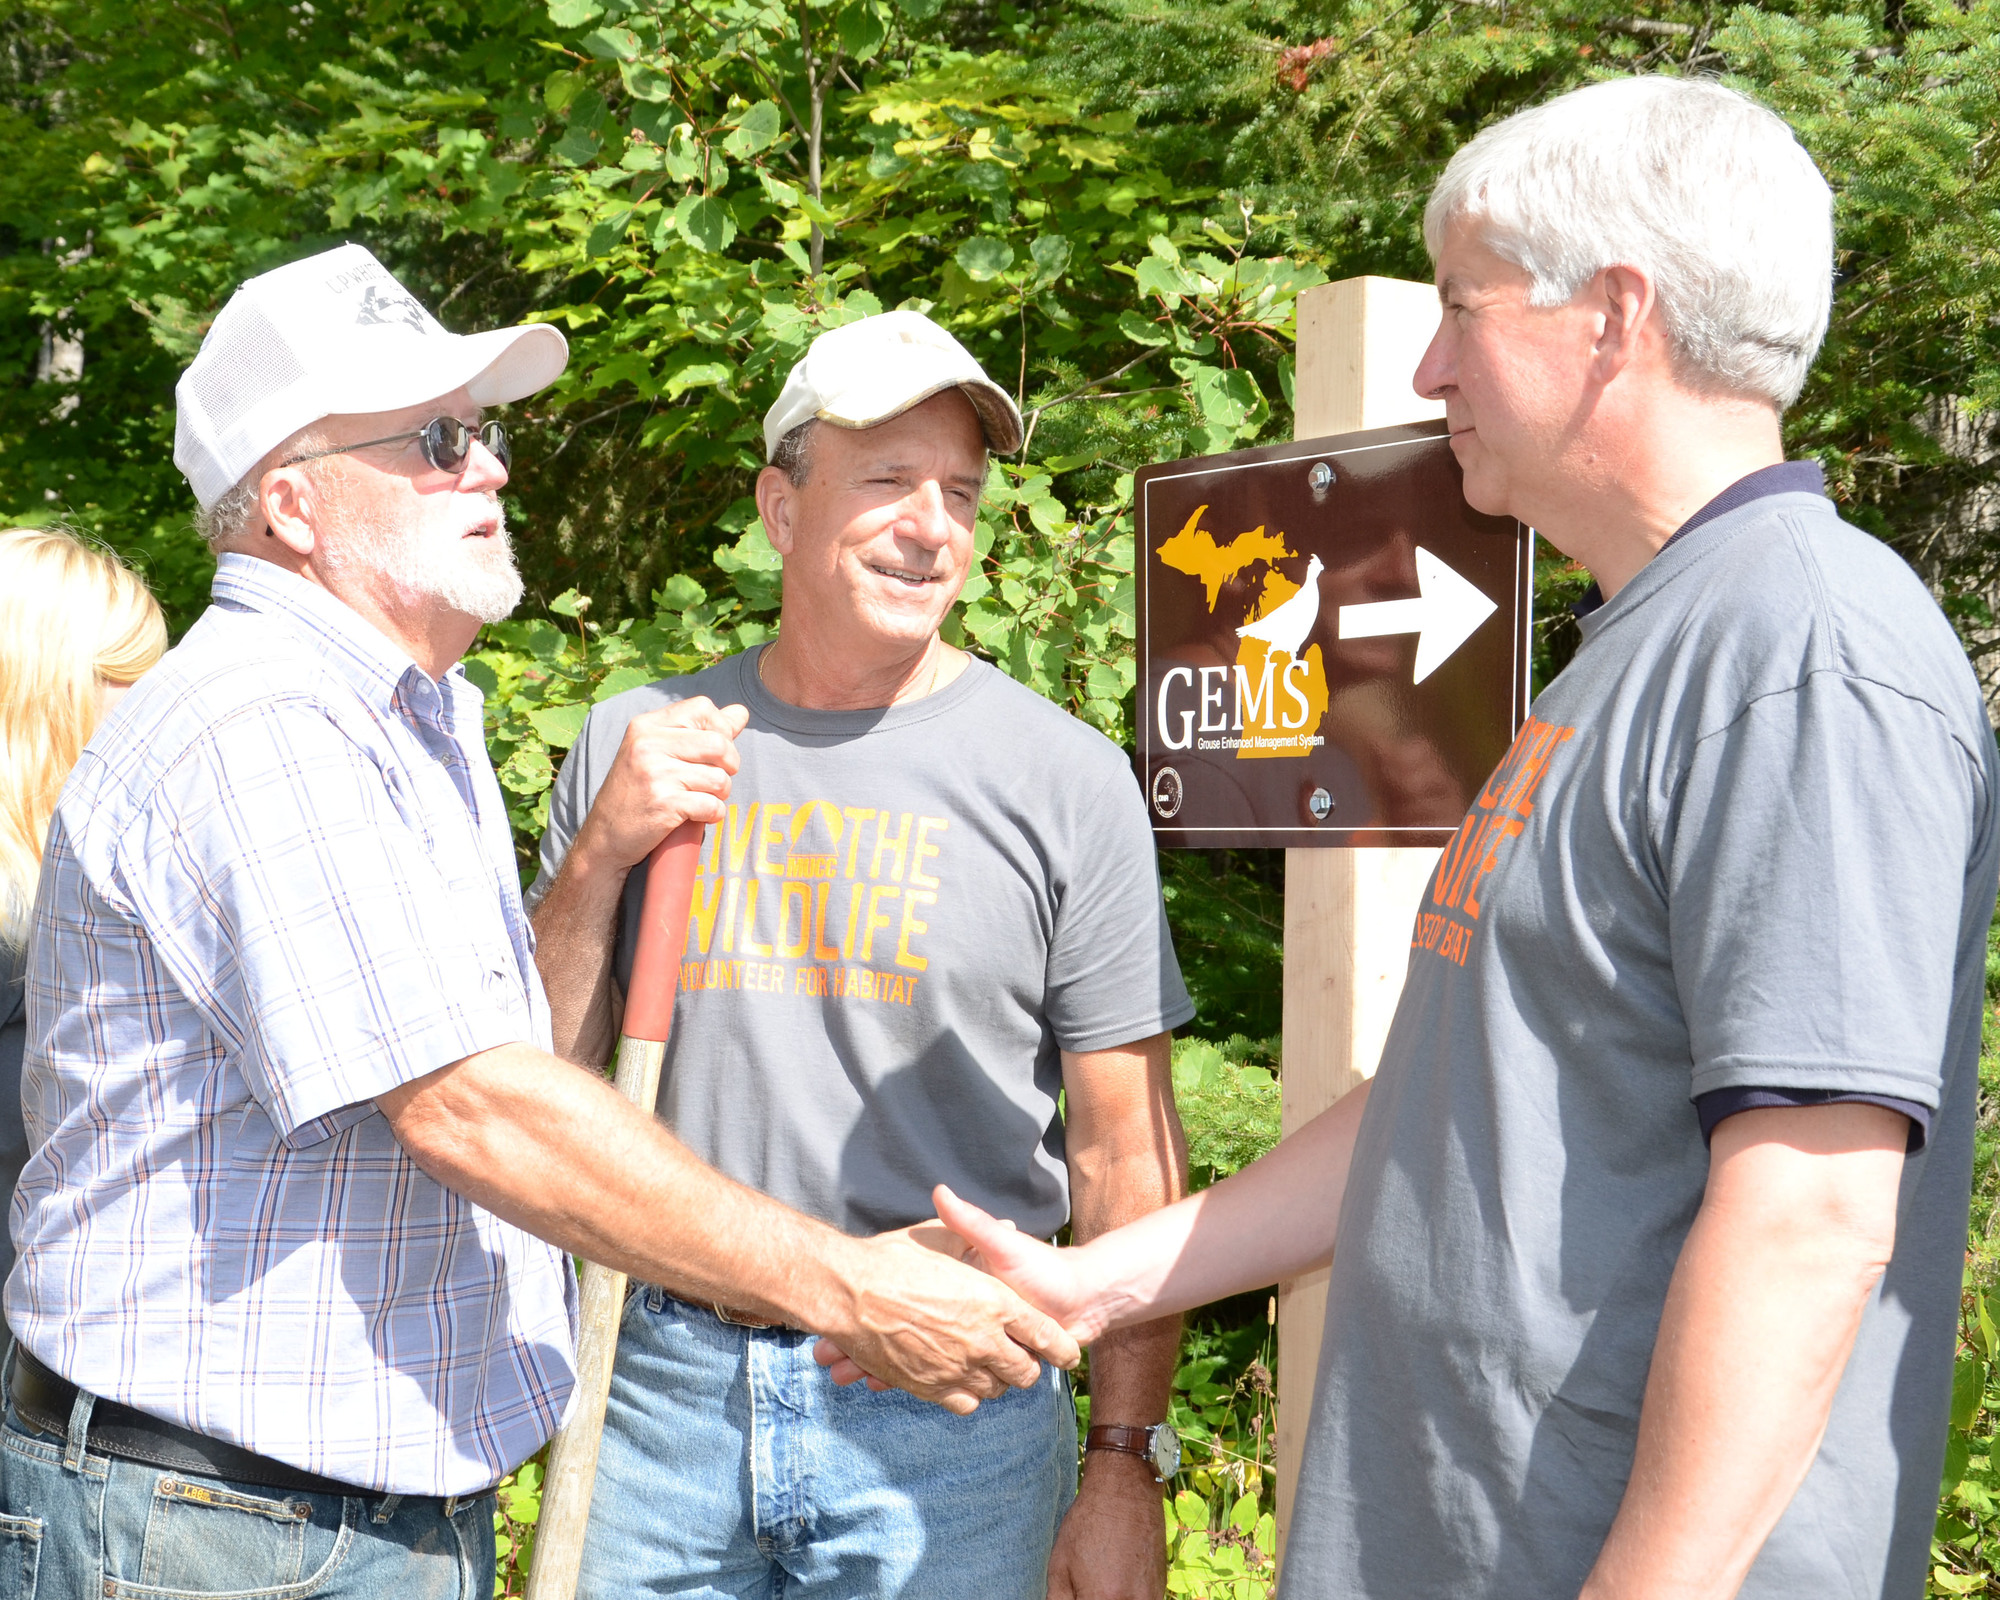 Alan Ettenhofer, left, shakes hands with Gov. Rick Snyder at a tree planting event in Marquette County in 2014.